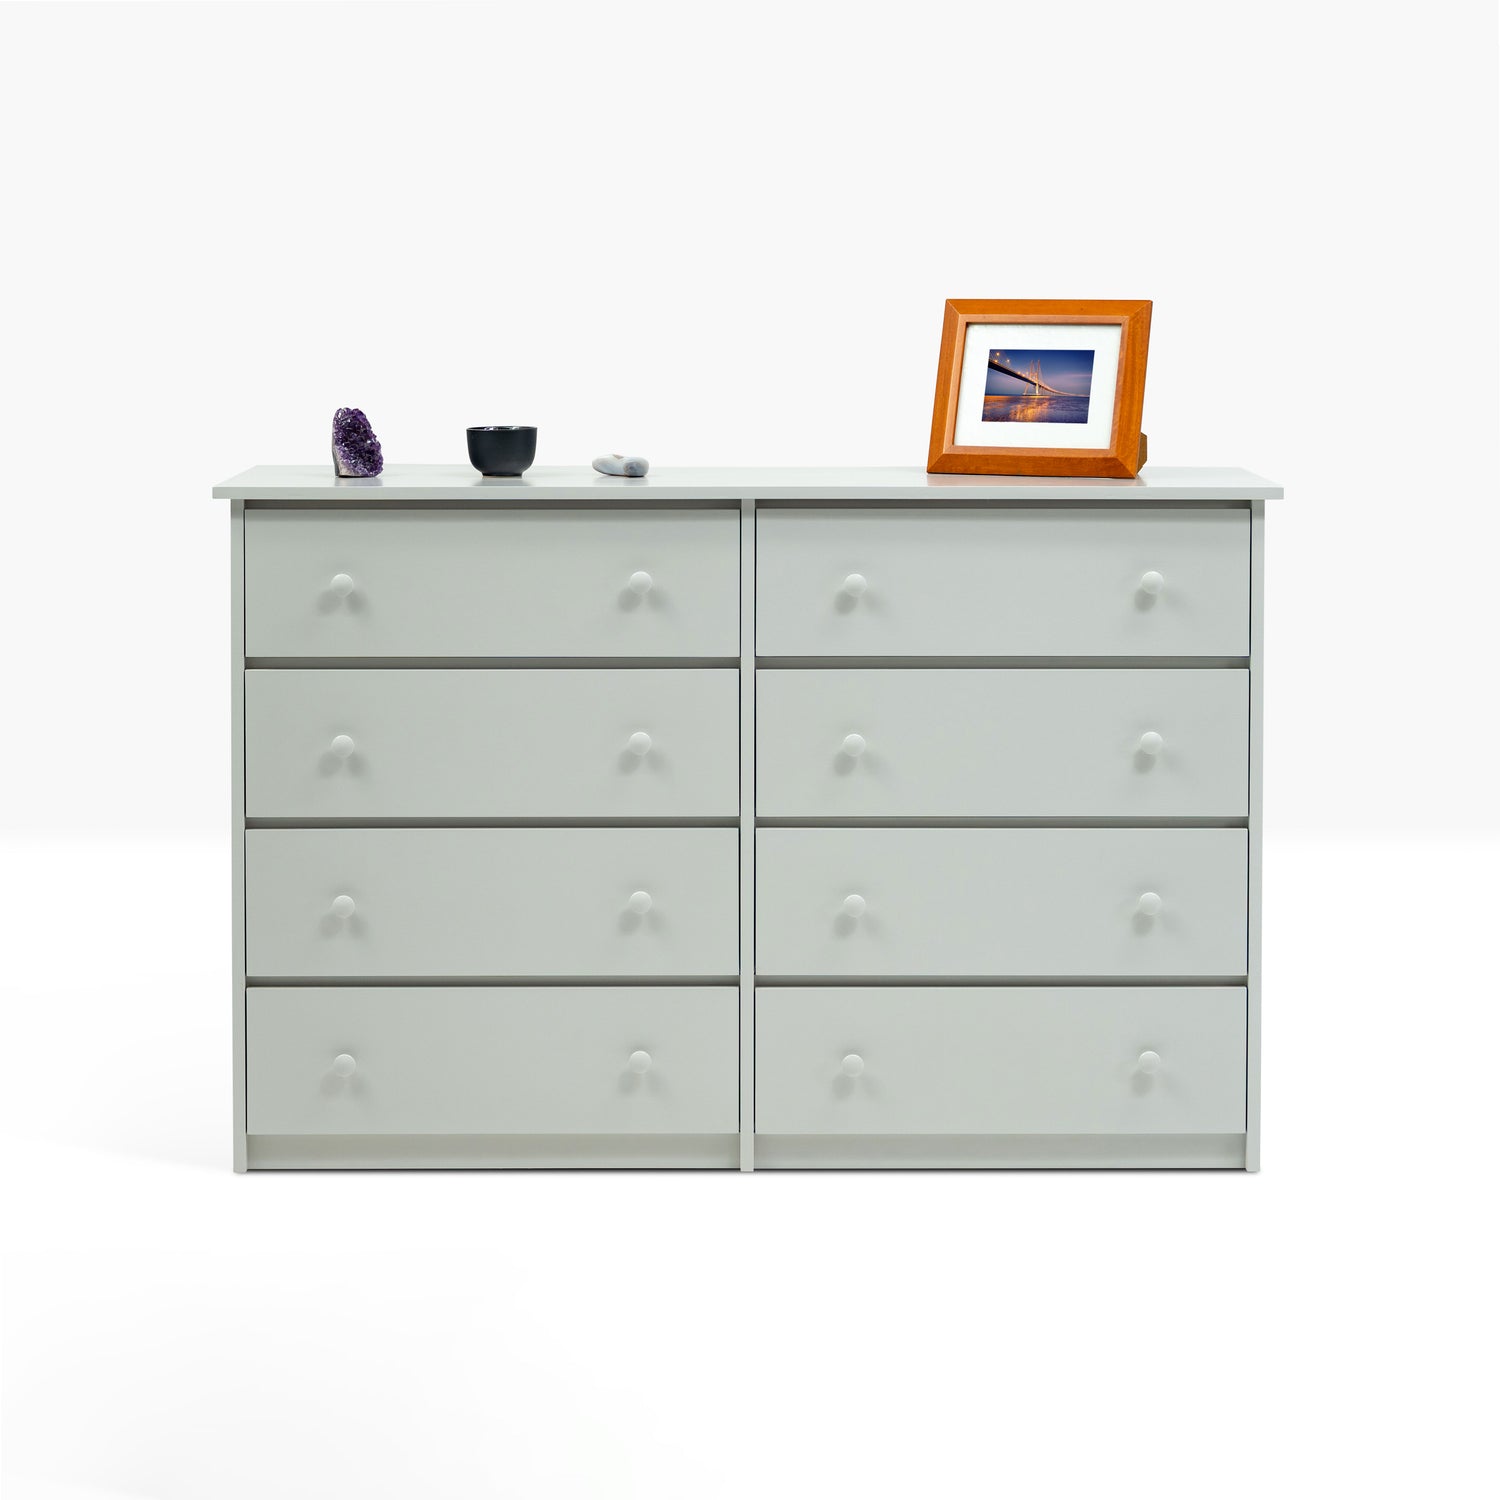 Eight drawer dresser built in birch finished in light gray paint color.